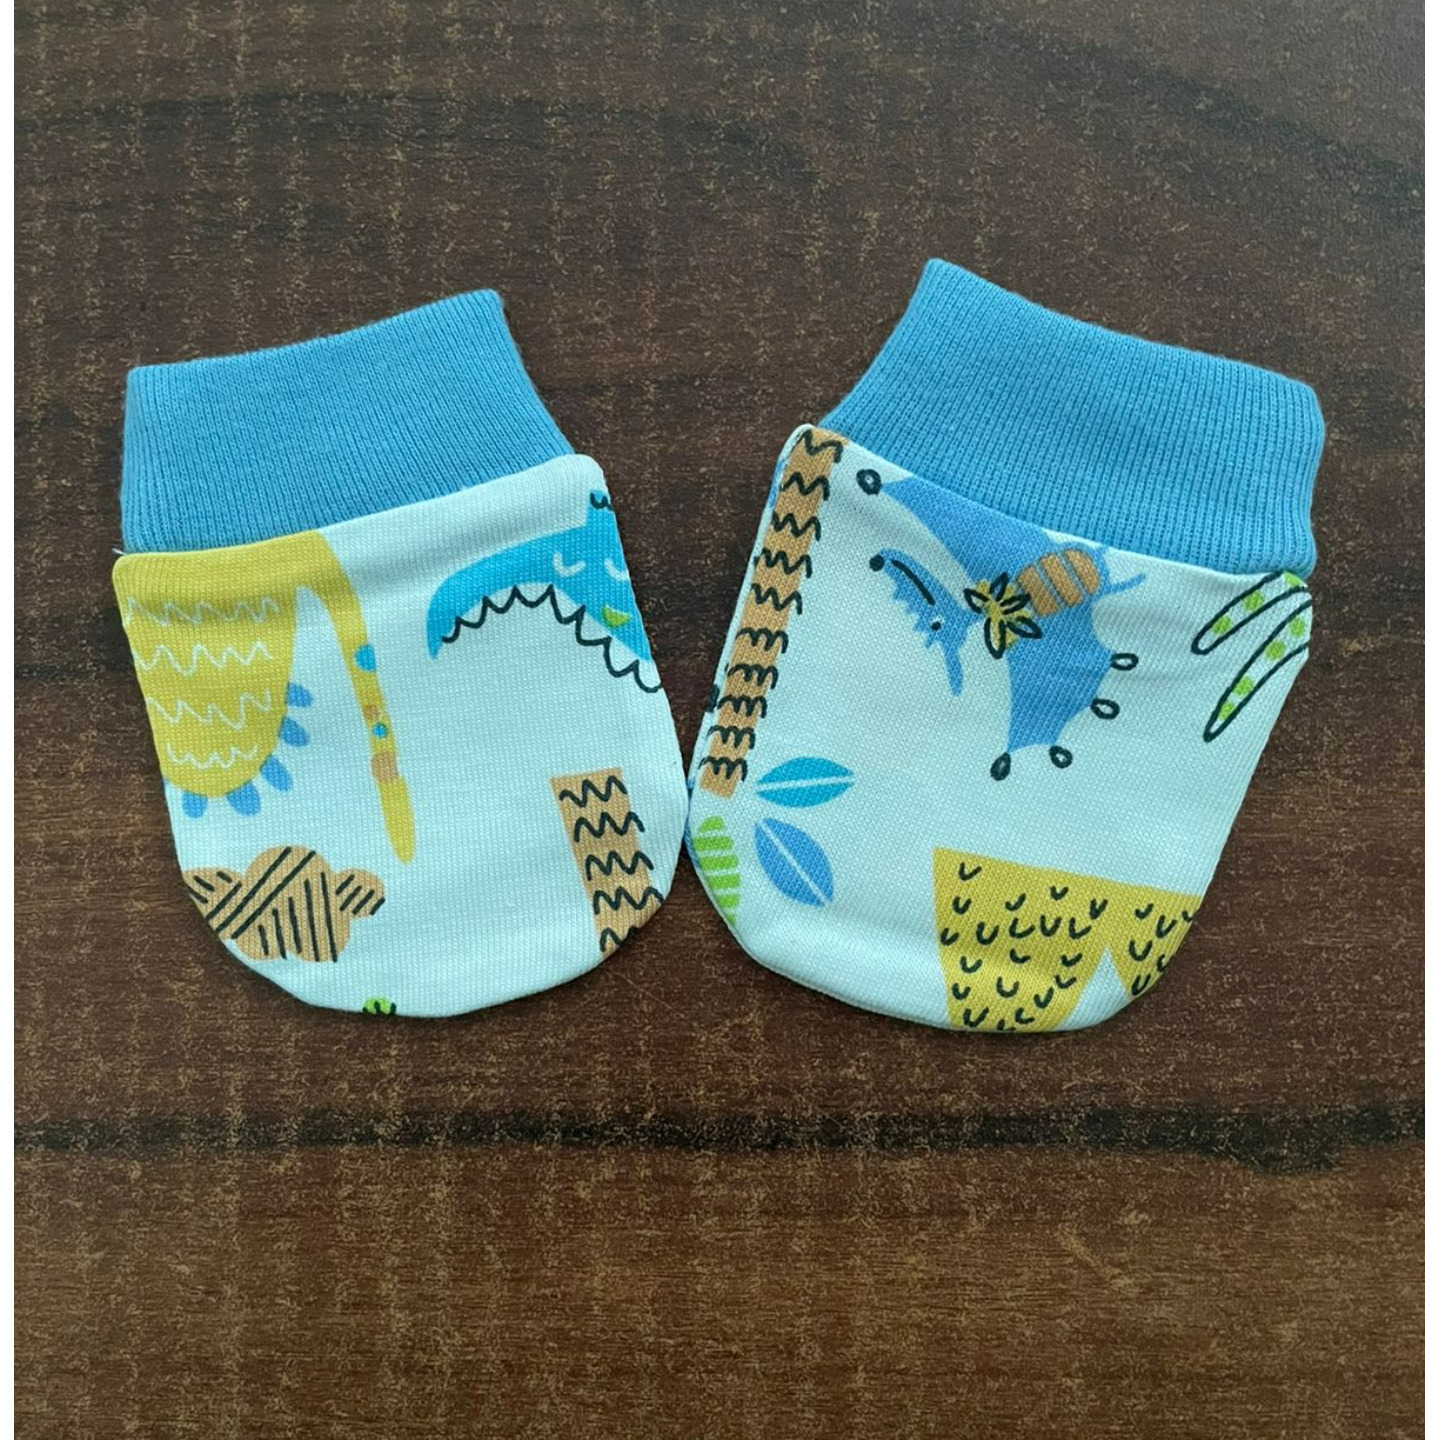 Cradle Togs Mittens Rs 70 Only NewBorn babies